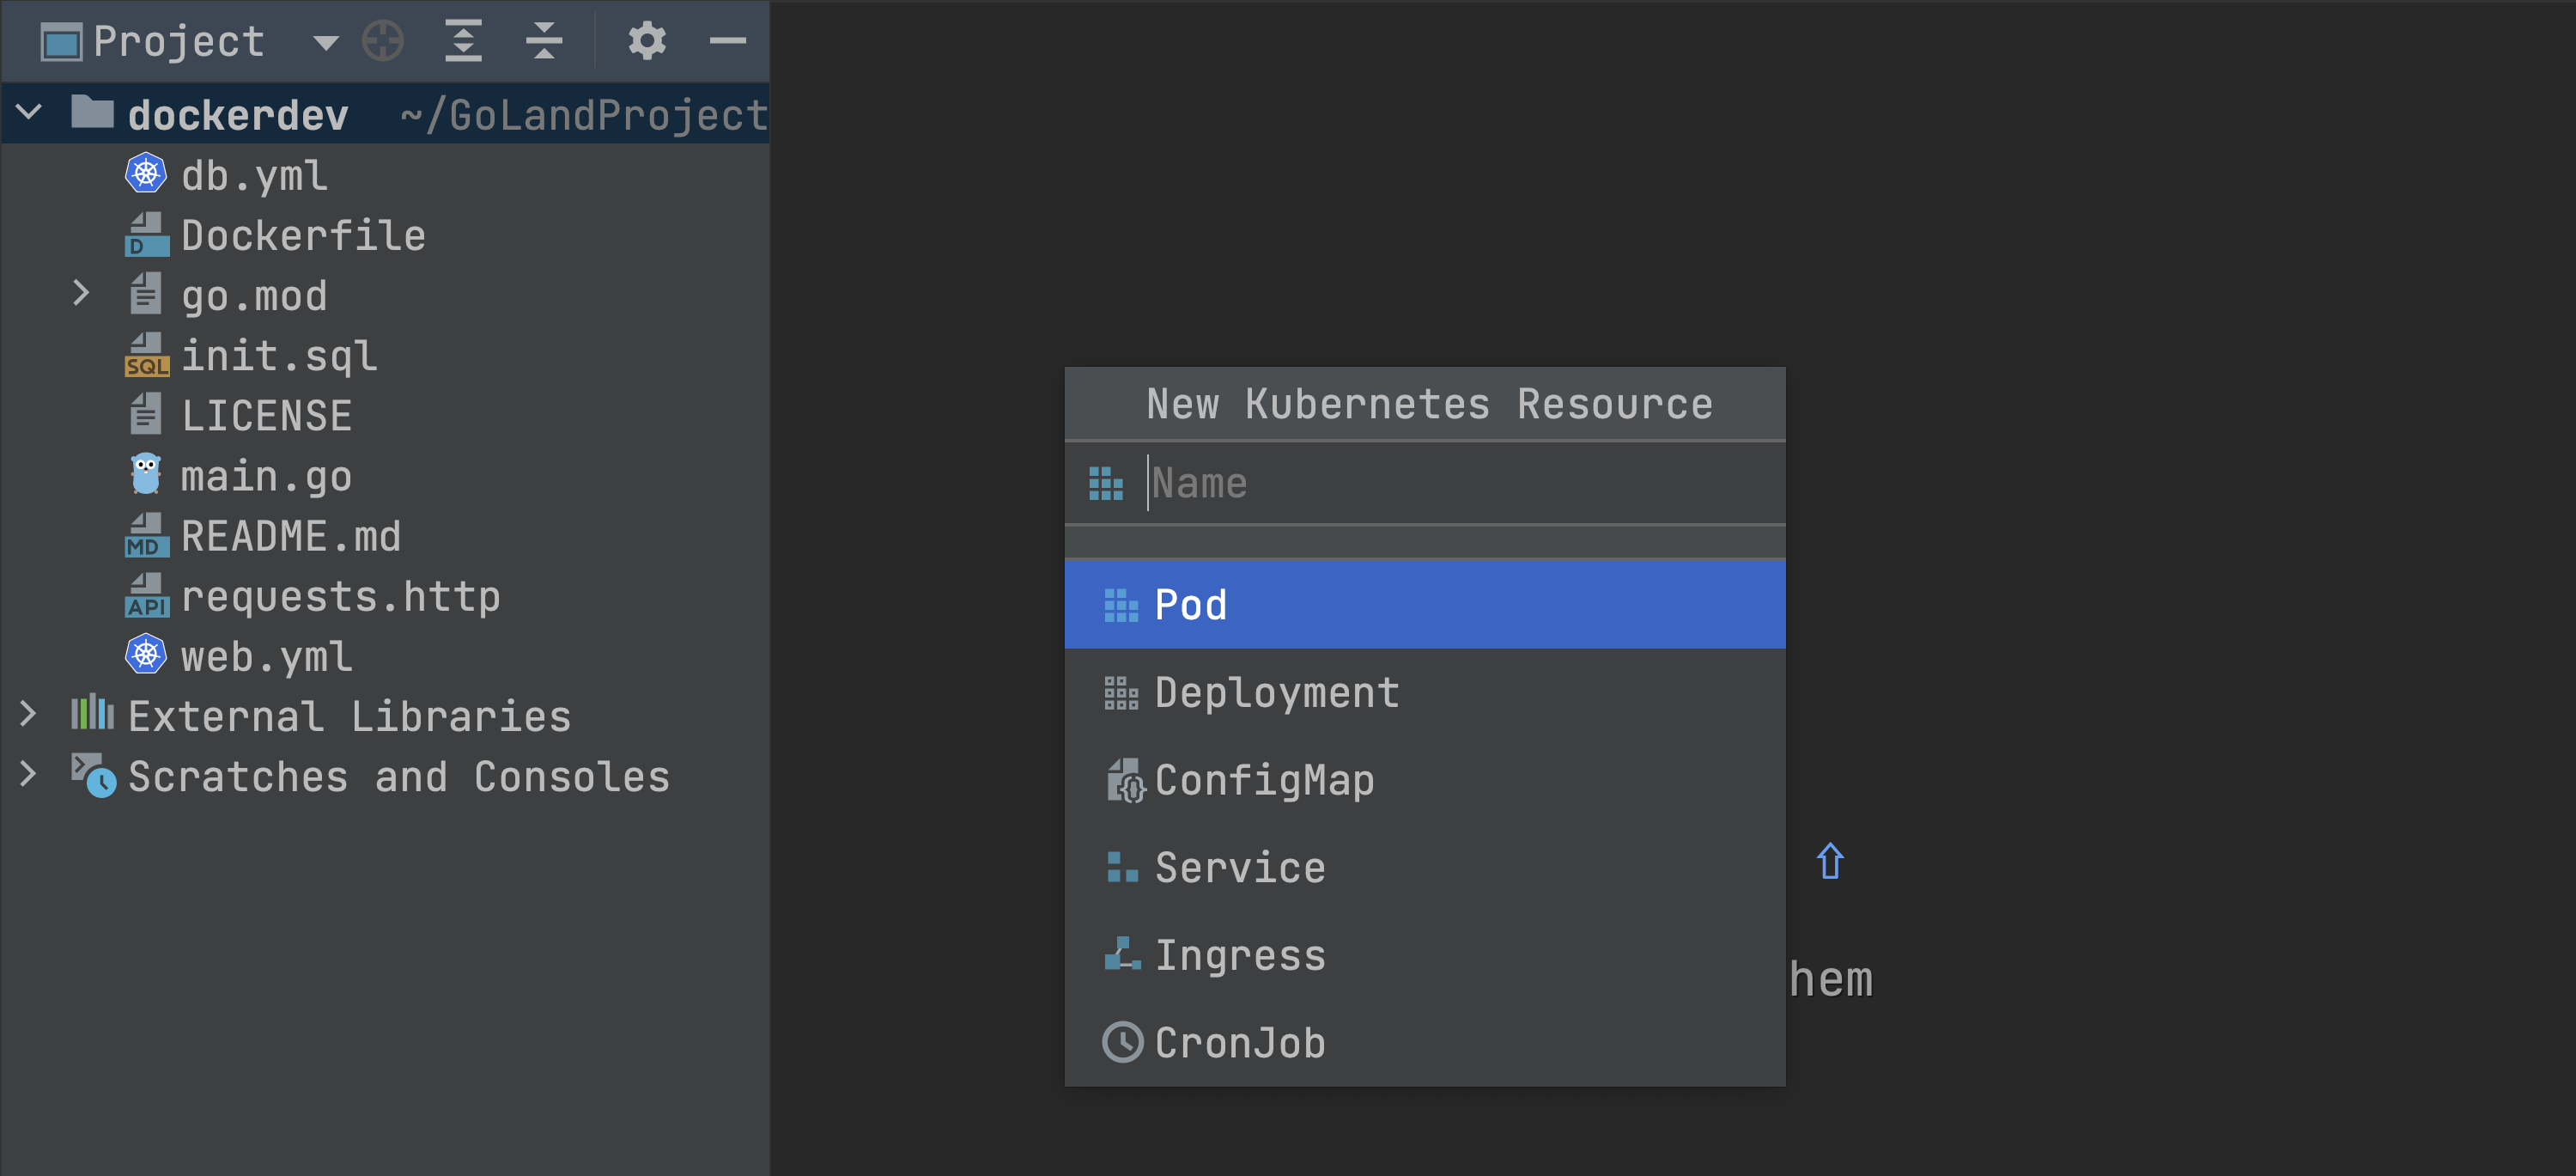 Creating a new Kubernetes resource